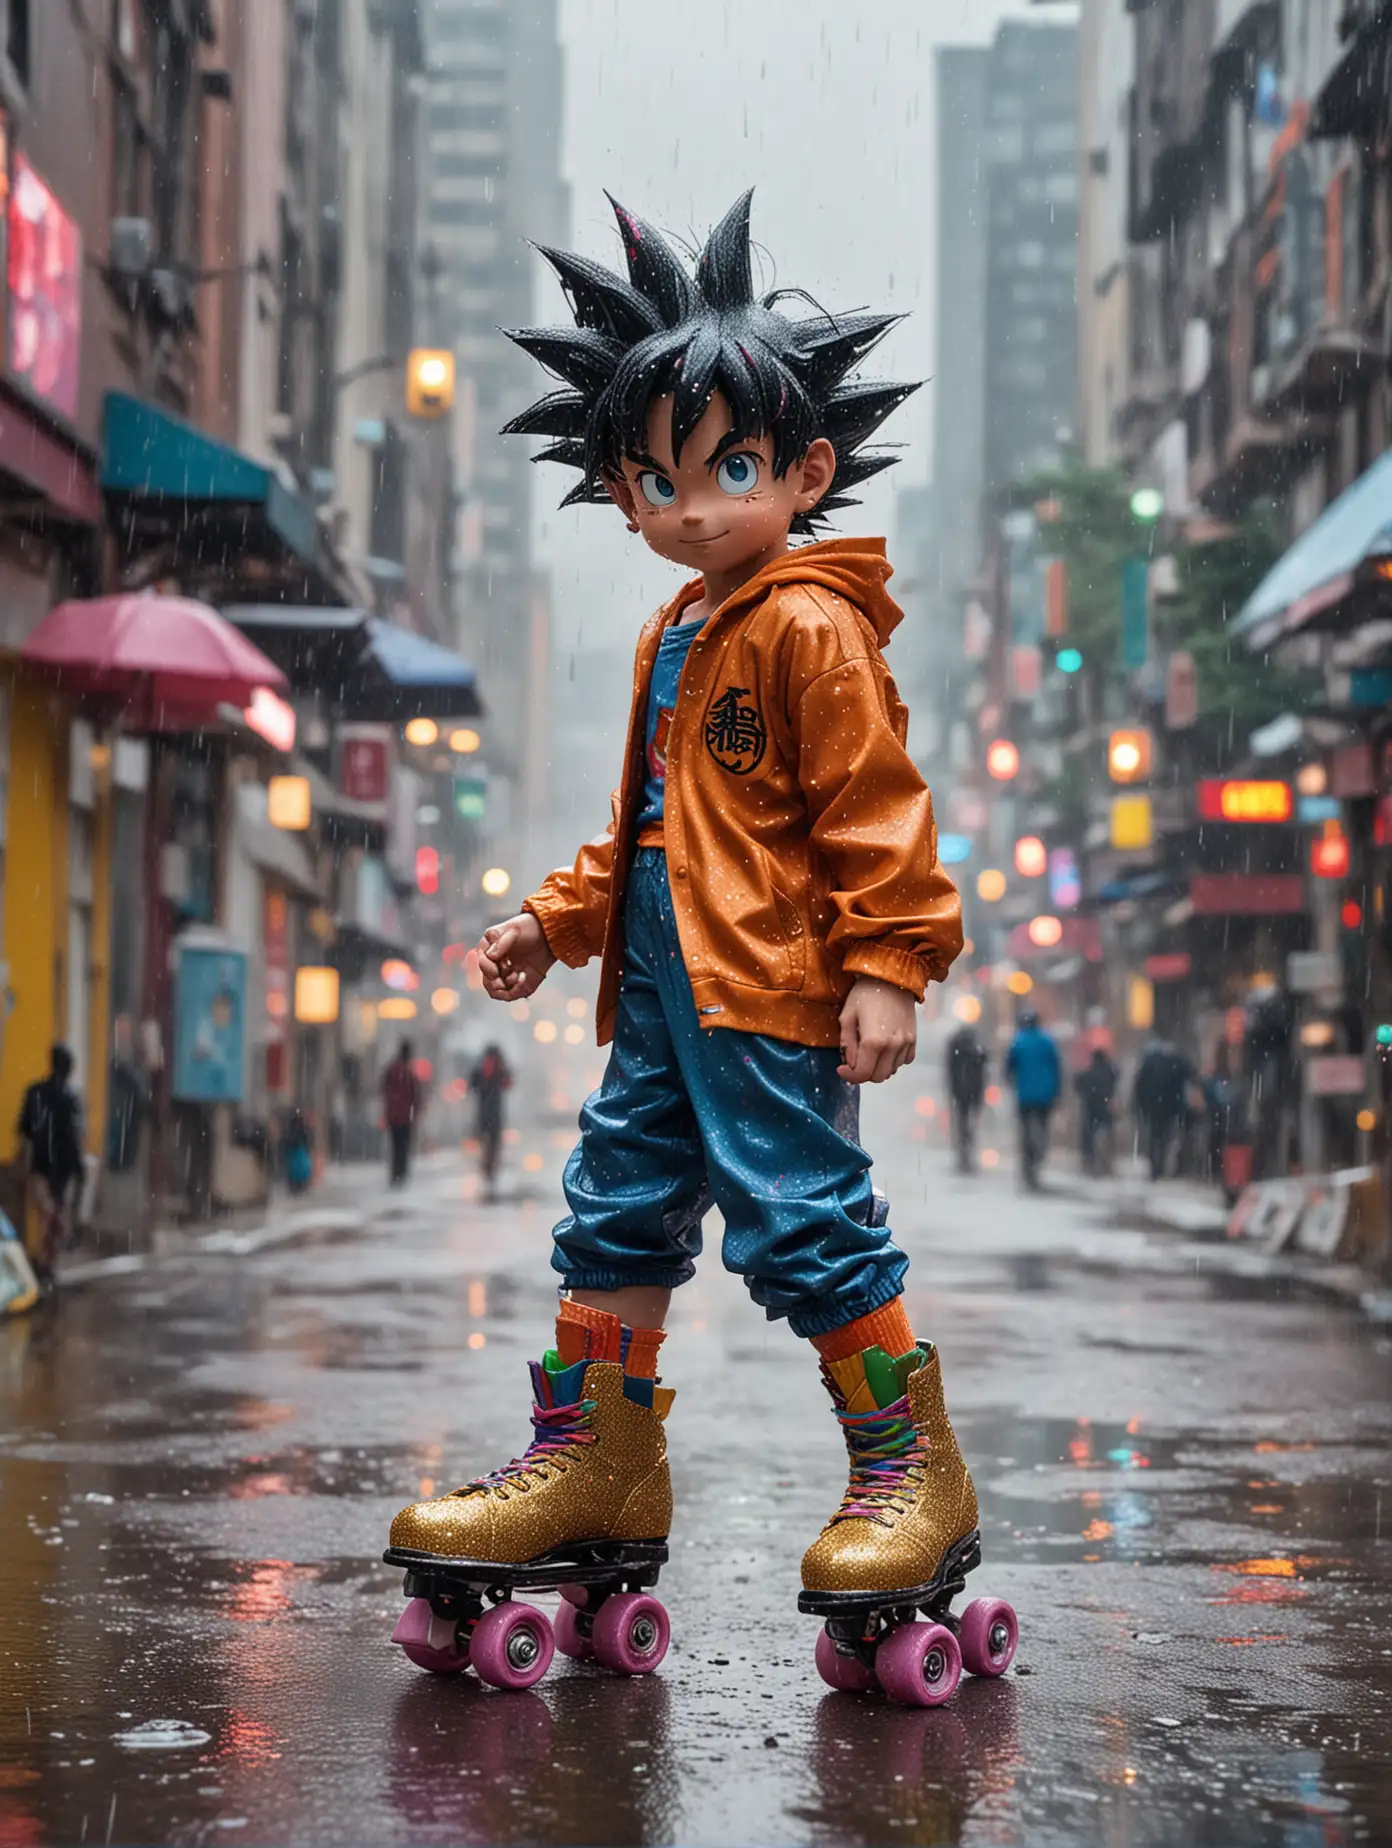 Goku is Riding Glitter Rainbow Roller Skates. in the middle of the city when it rains